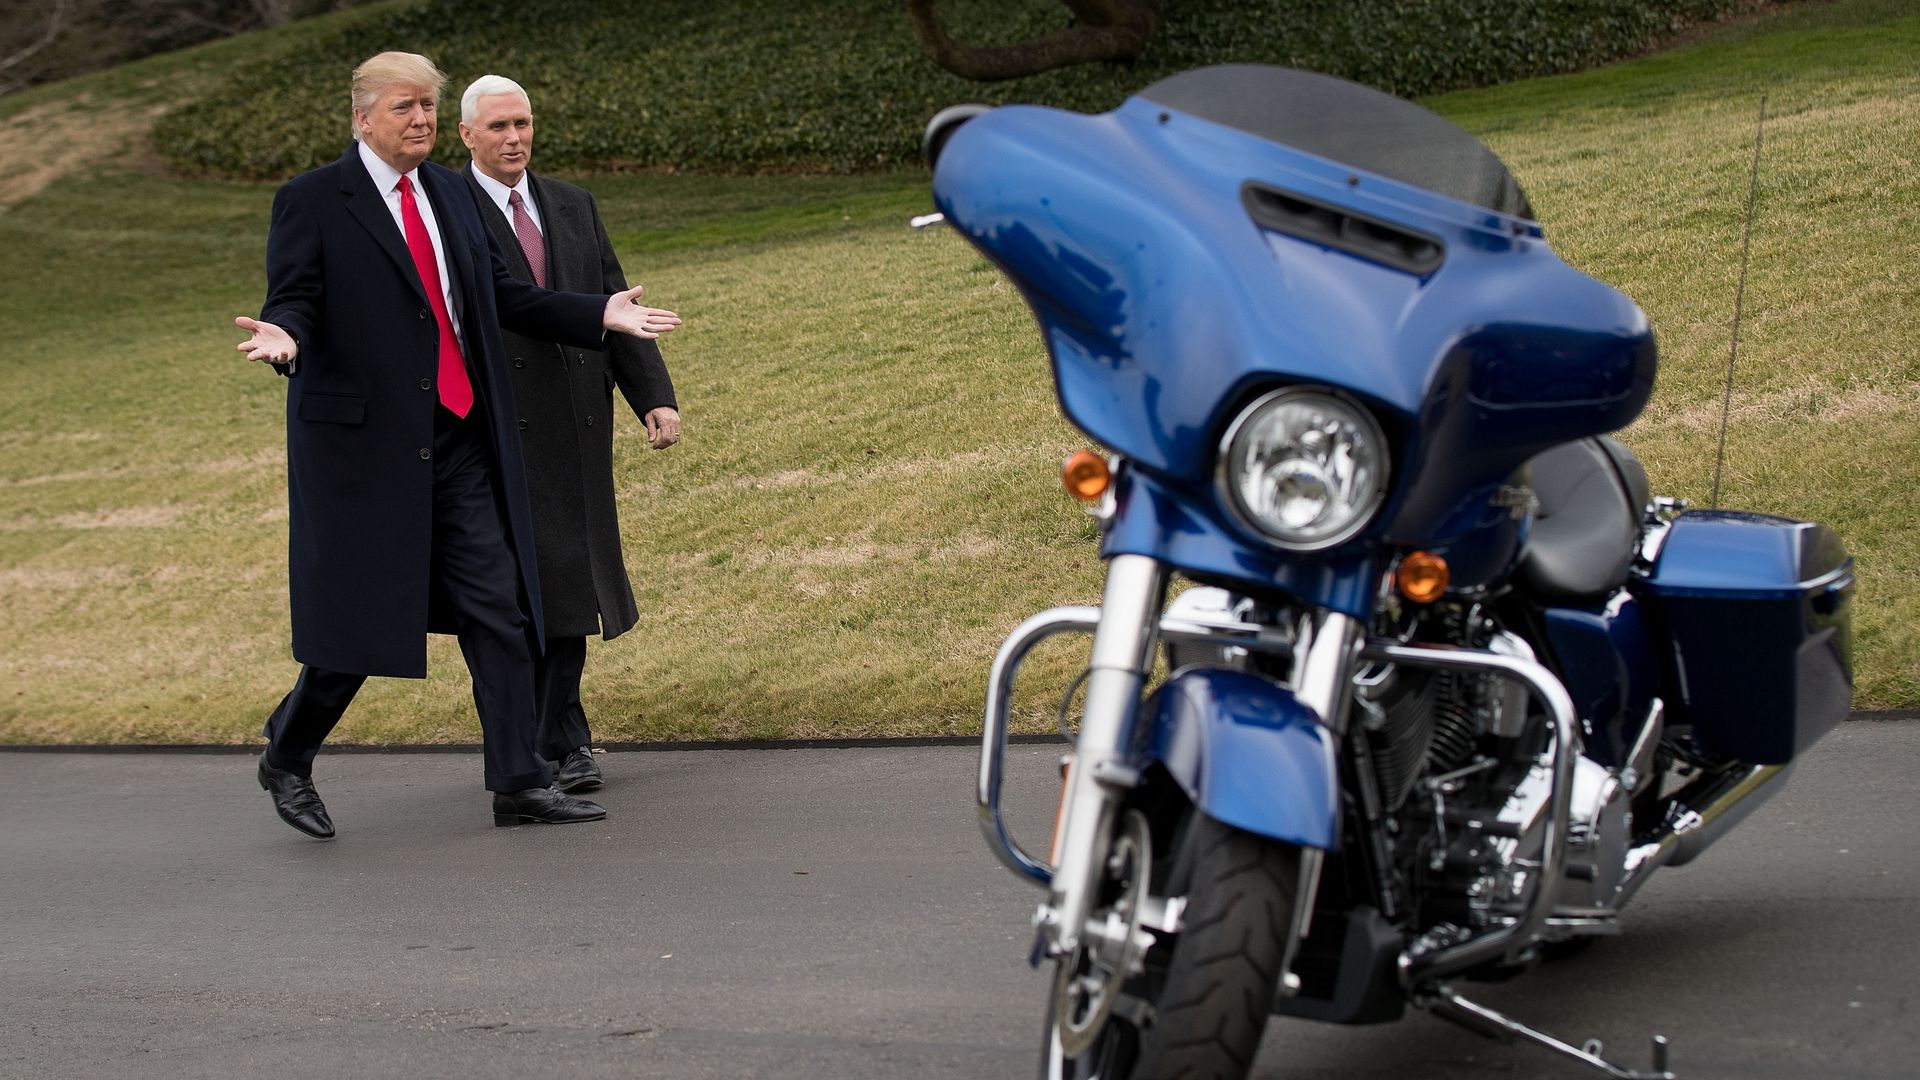 President Trump and VP Pence approach a Harley-Davidson motorcycle.